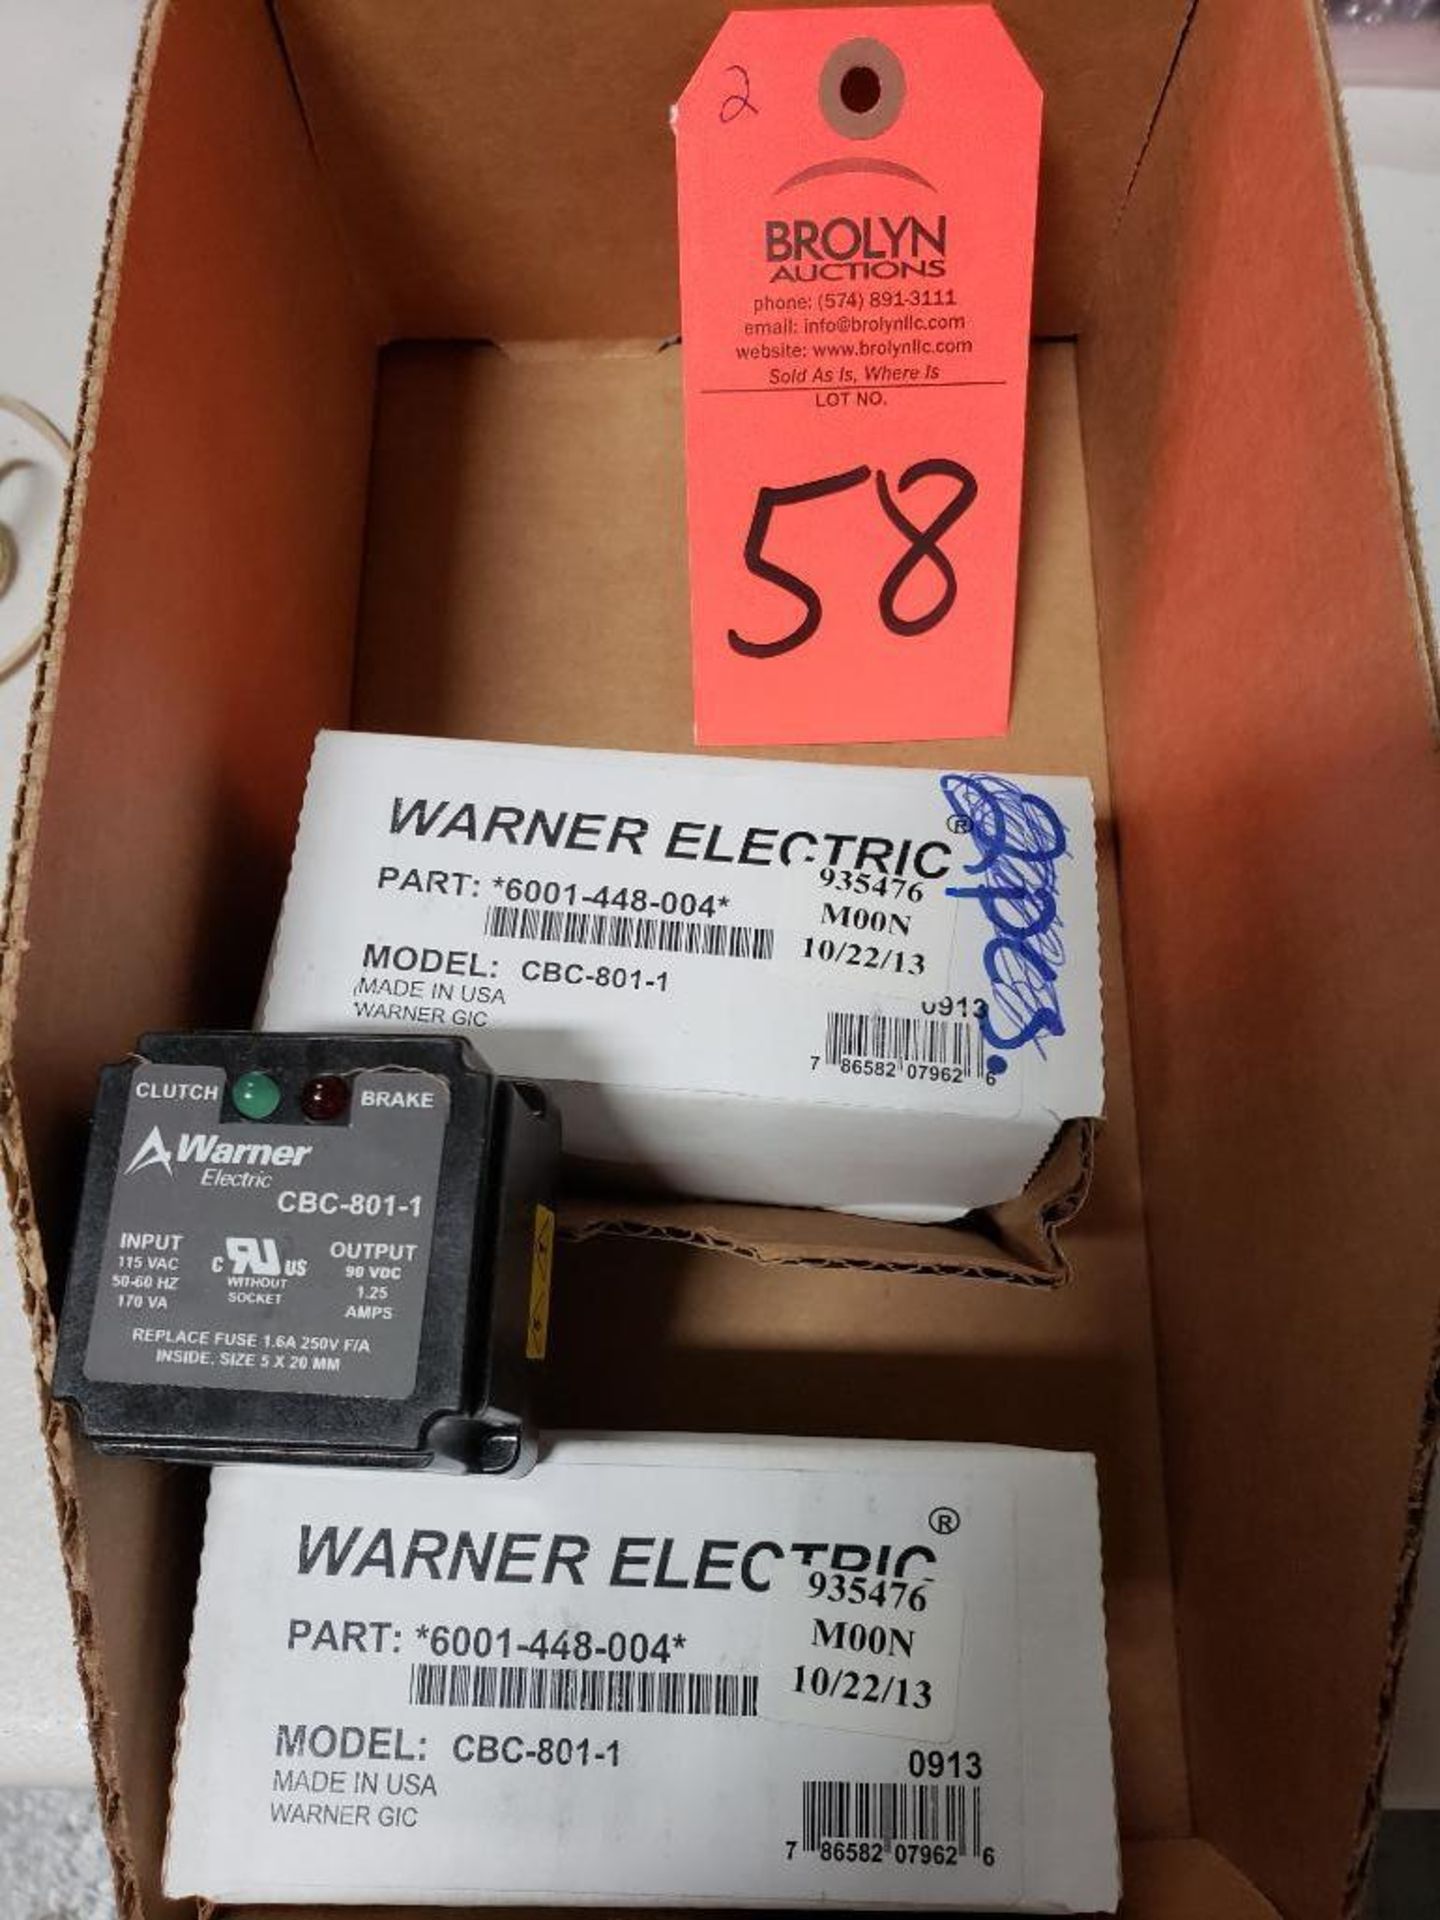 Qty 2 - Warner Electric model CBC-801-1. New in boxes.